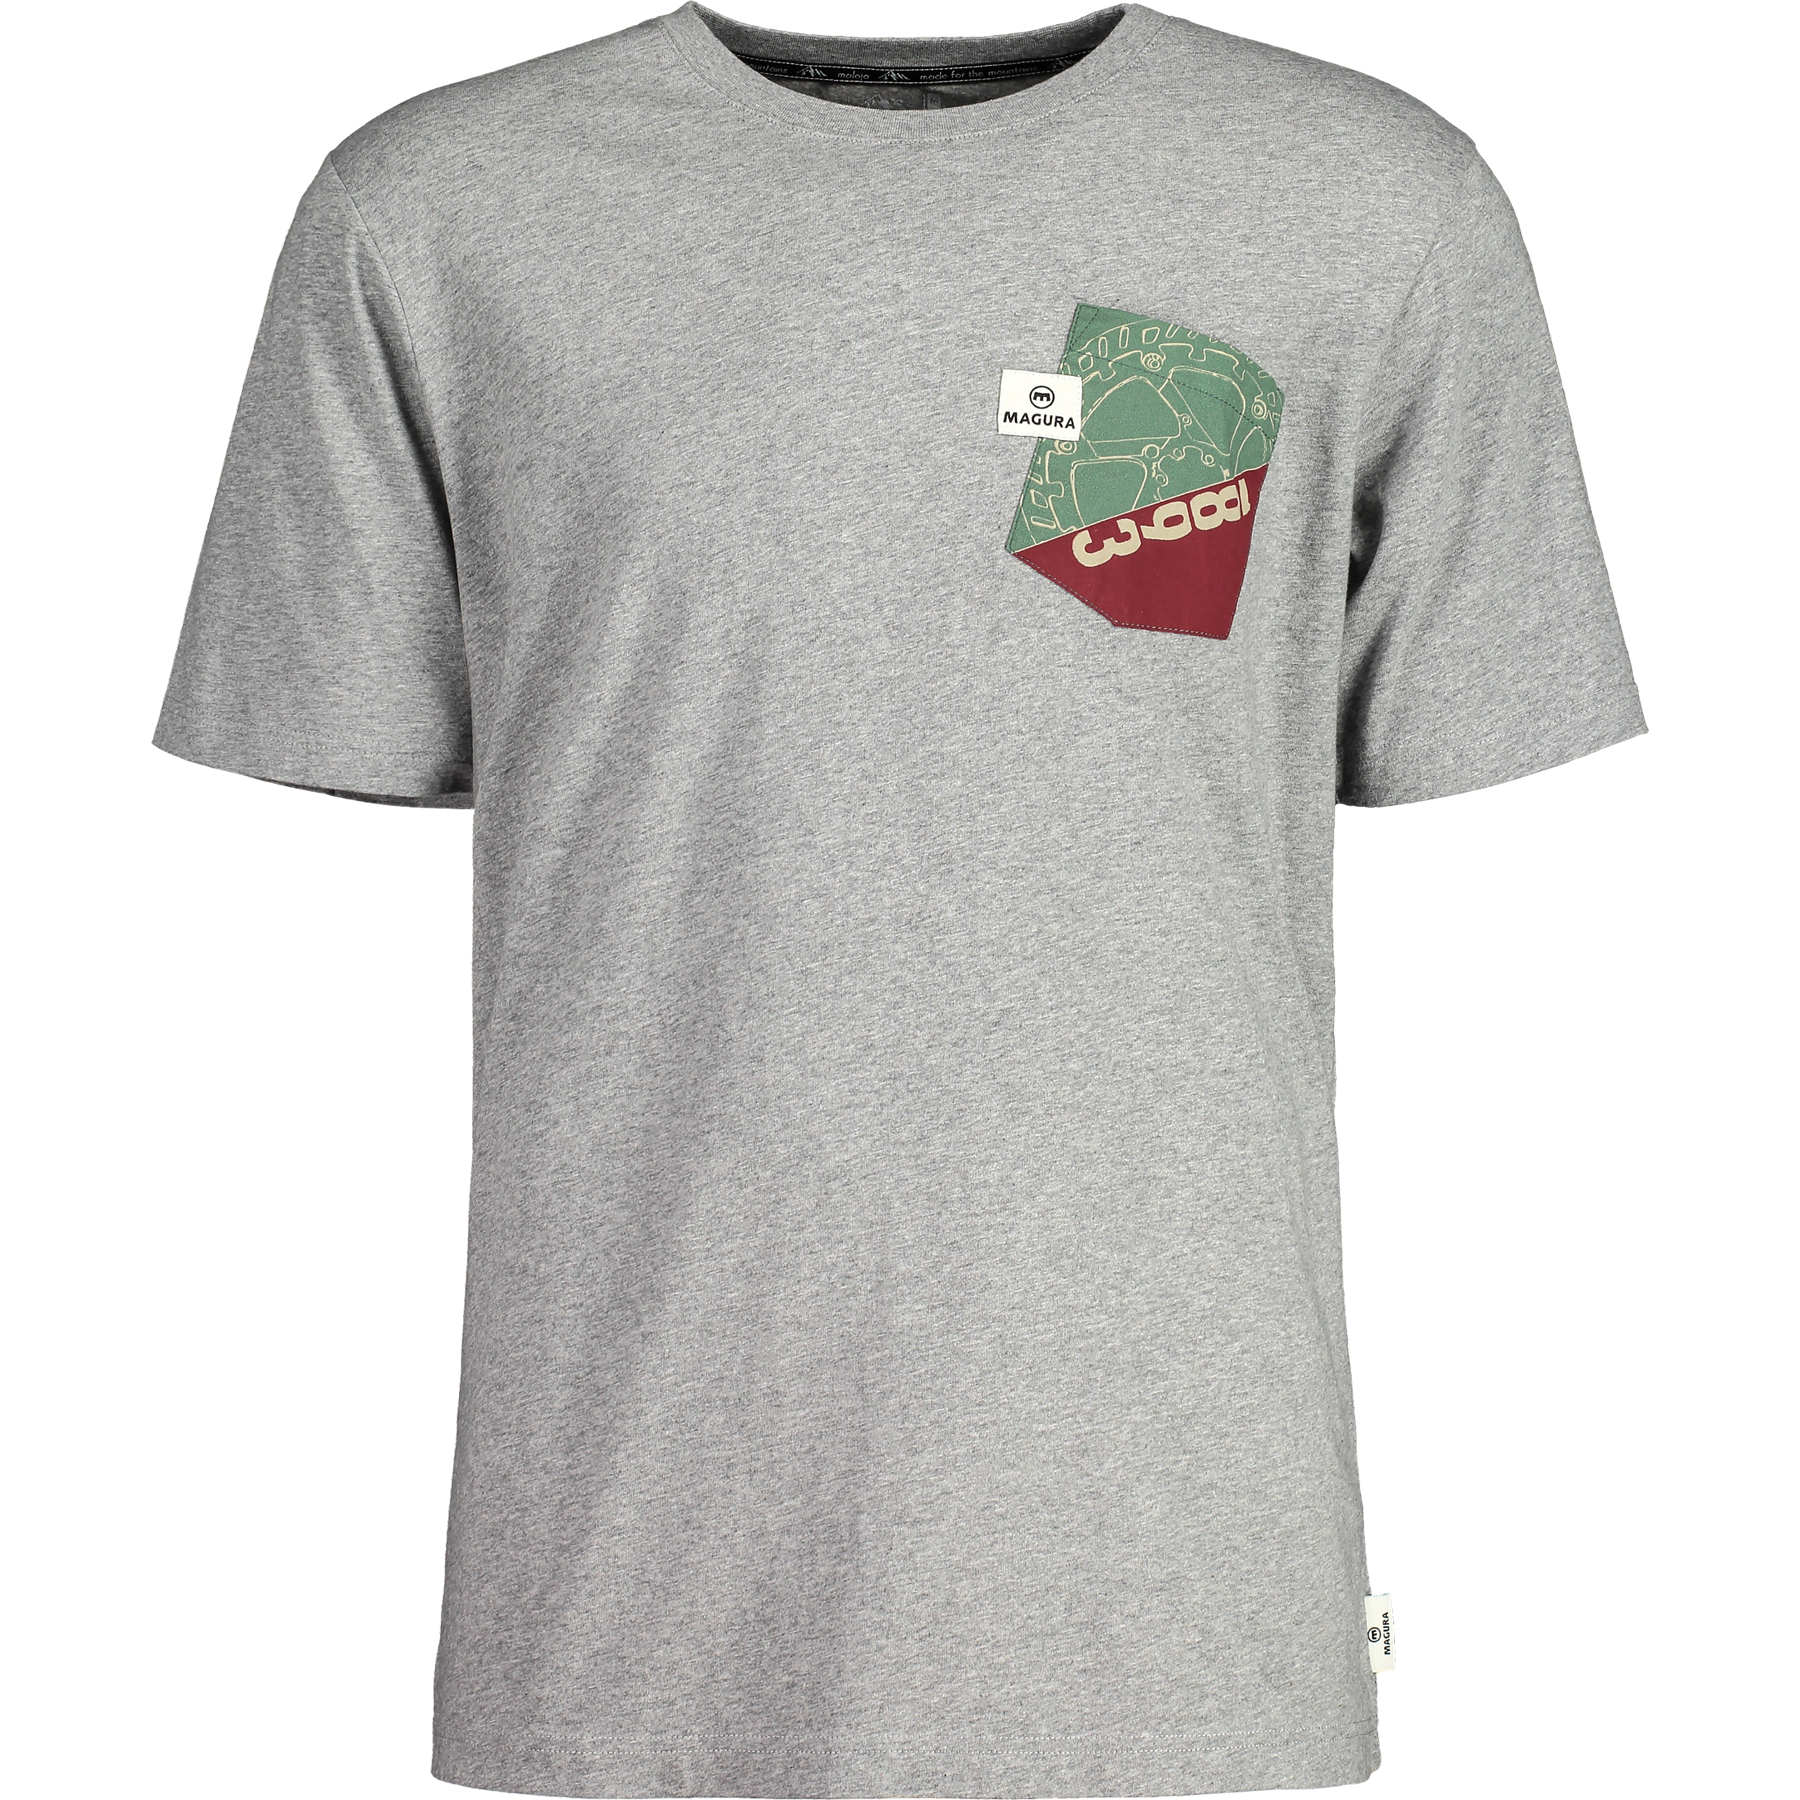 Picture of Magura Rotor T-Shirt by Maloja - grey